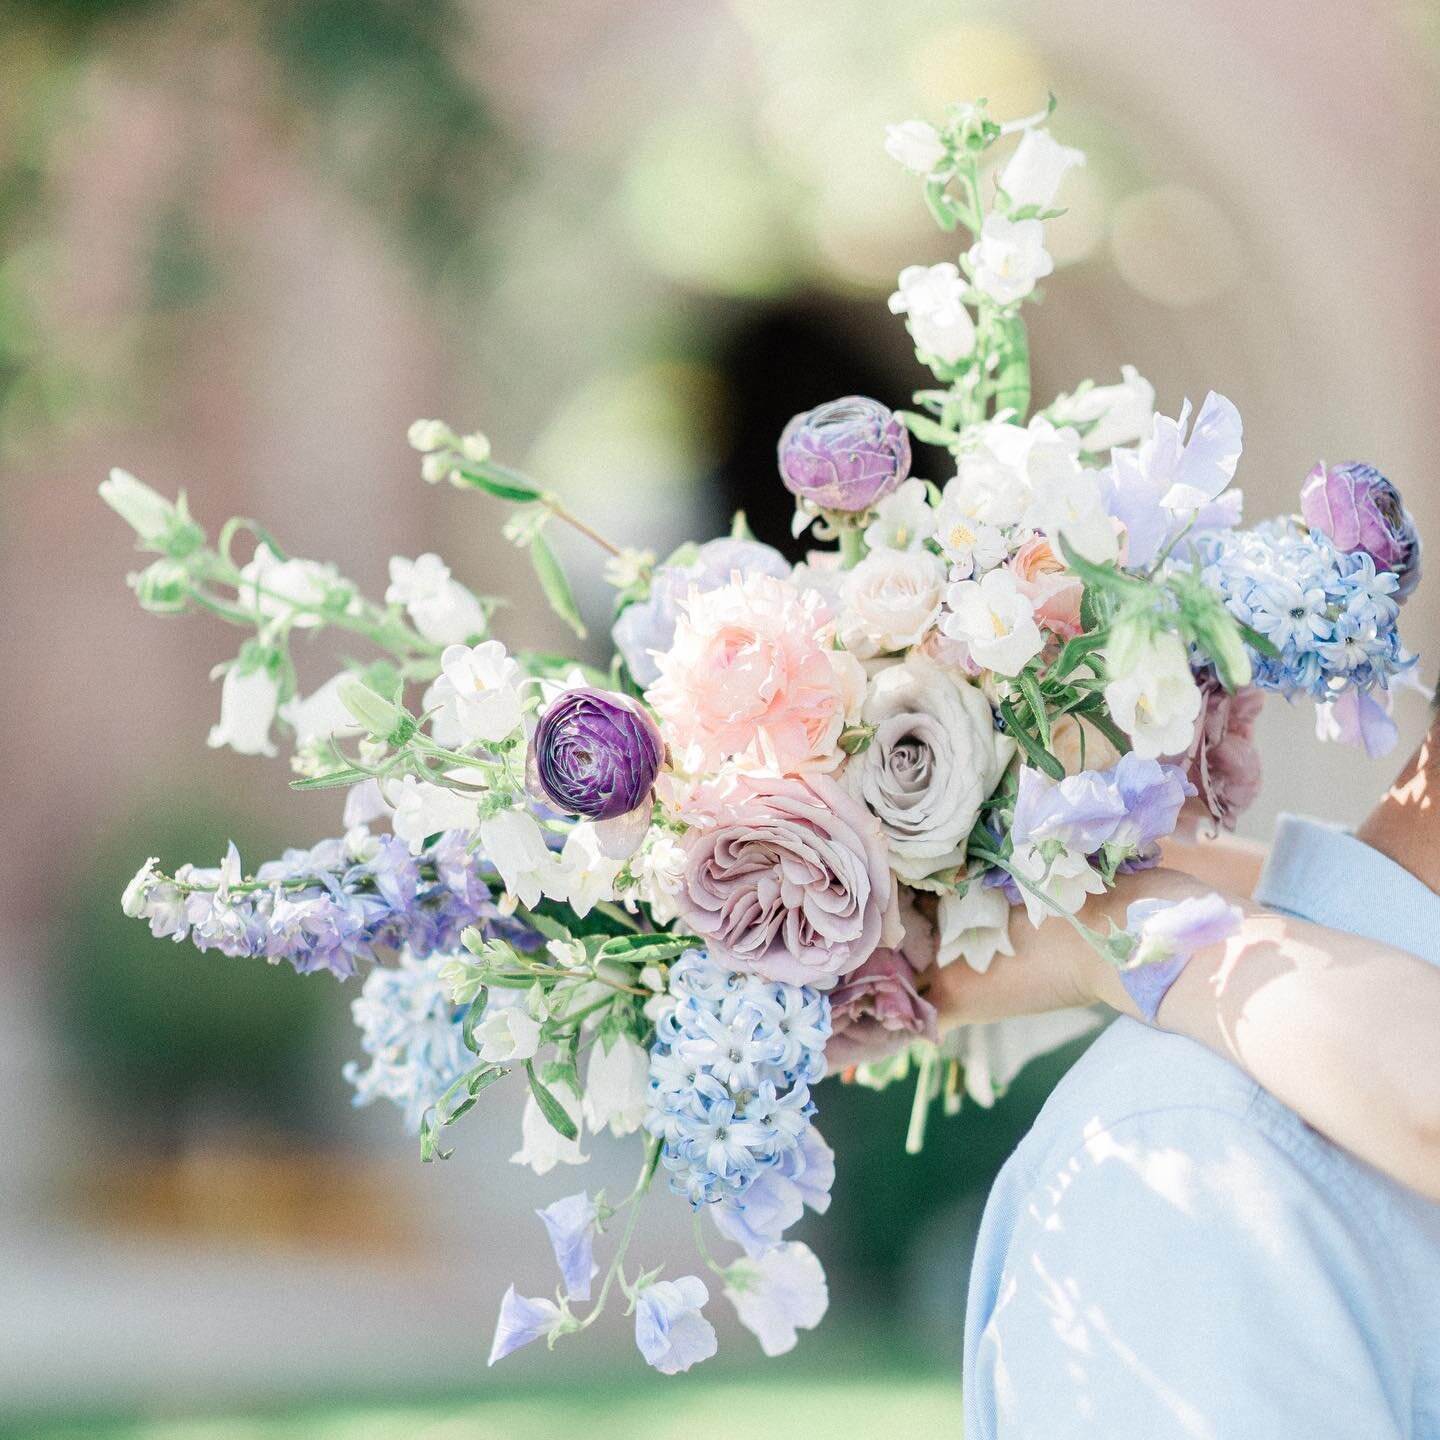 All the attention to the details of the flowers. In love with lavender and purple hues 

Photographer: @donnalamphotography 
Florist: @wild_and_behold_florals 

#bridalbouquet #engagementphotos 
#engagementbouquet #floralbouquet #flowerbouquet #handt